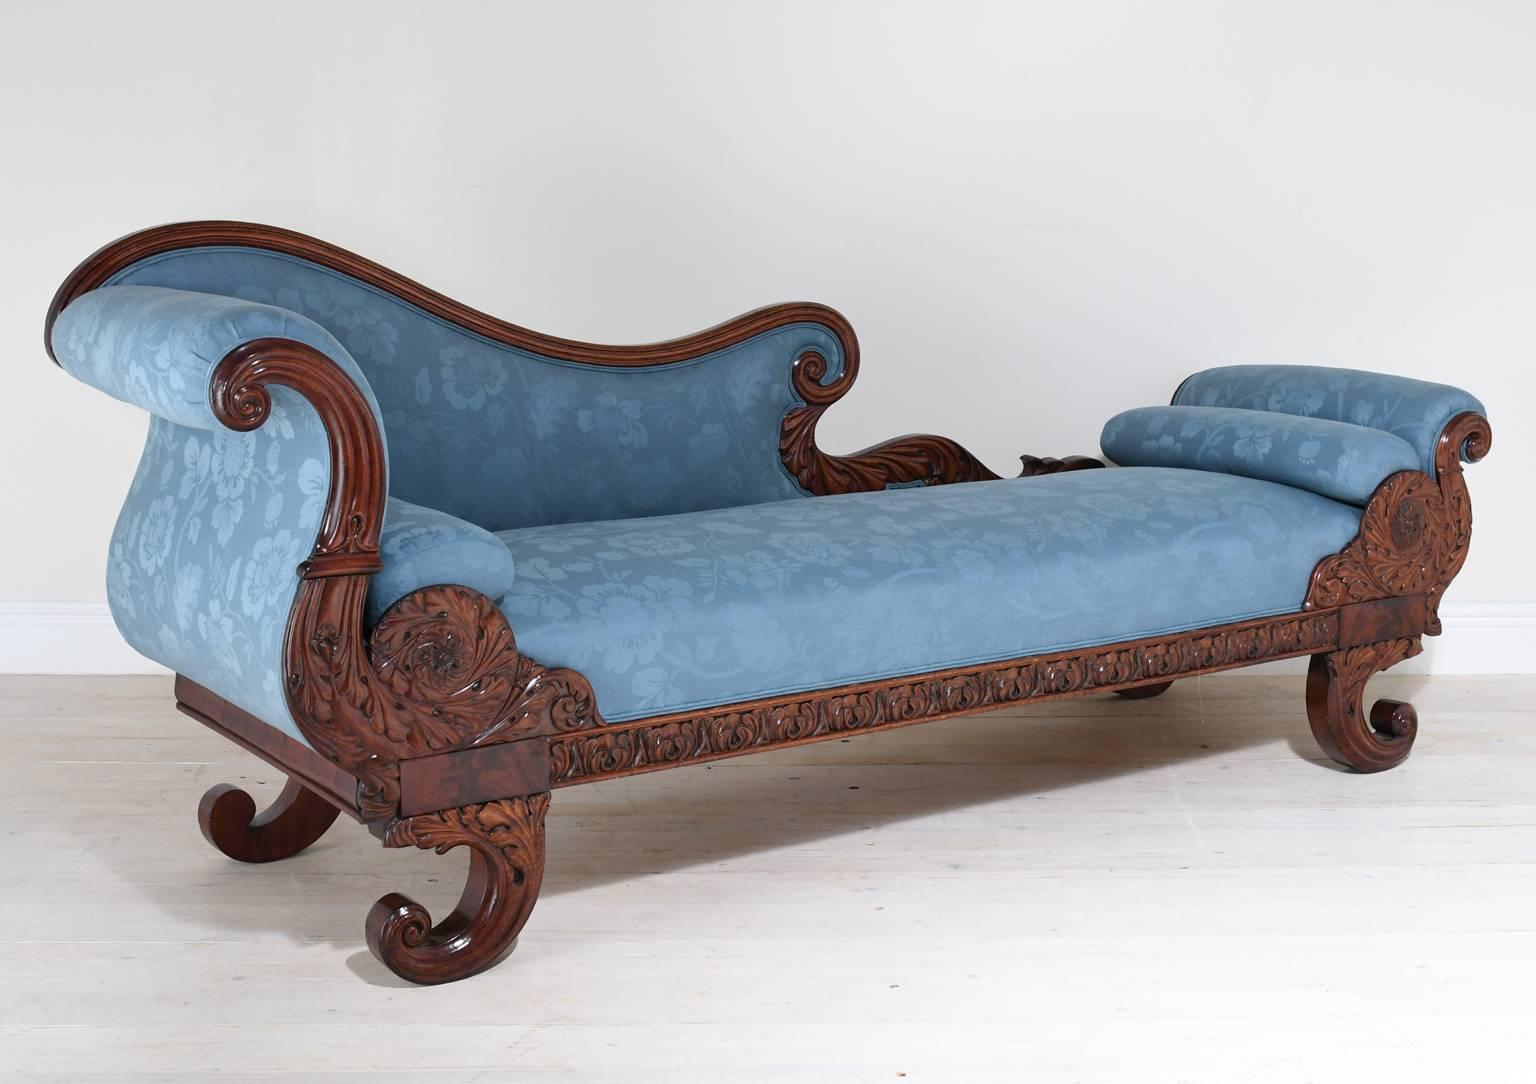 A captivating divan or chaise longue with graceful lines and fine proportions. Features scrolled arm and footrest, curved back, and cornucopia feet in mahogany, with finely carved acanthus leaves and rosettes, Northern Europe, circa 1810. A great